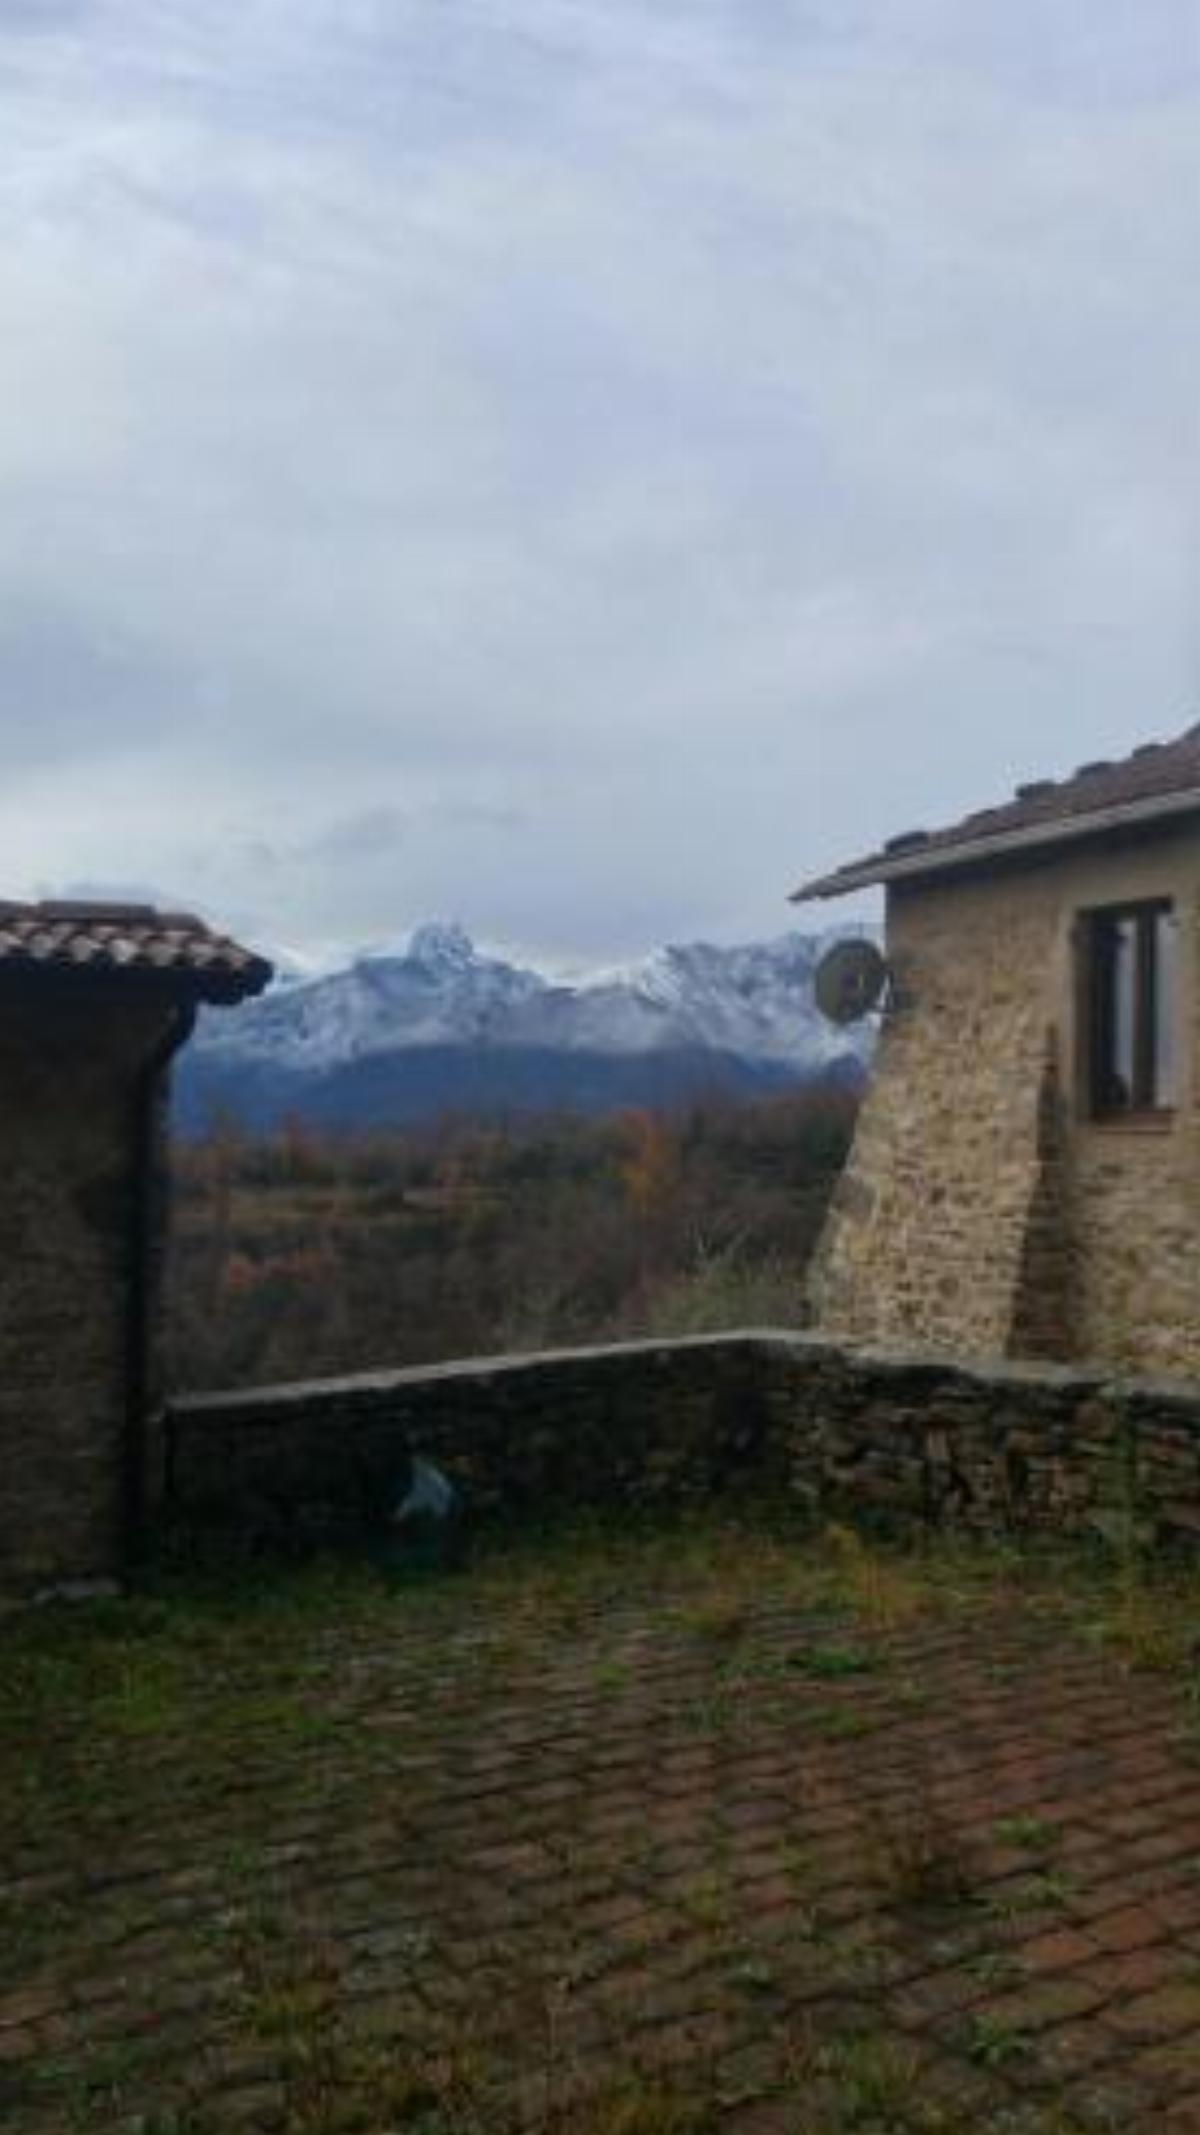 Stone farmhouse with a dream view, the Tuscan Court. Hotel Fivizzano Italy